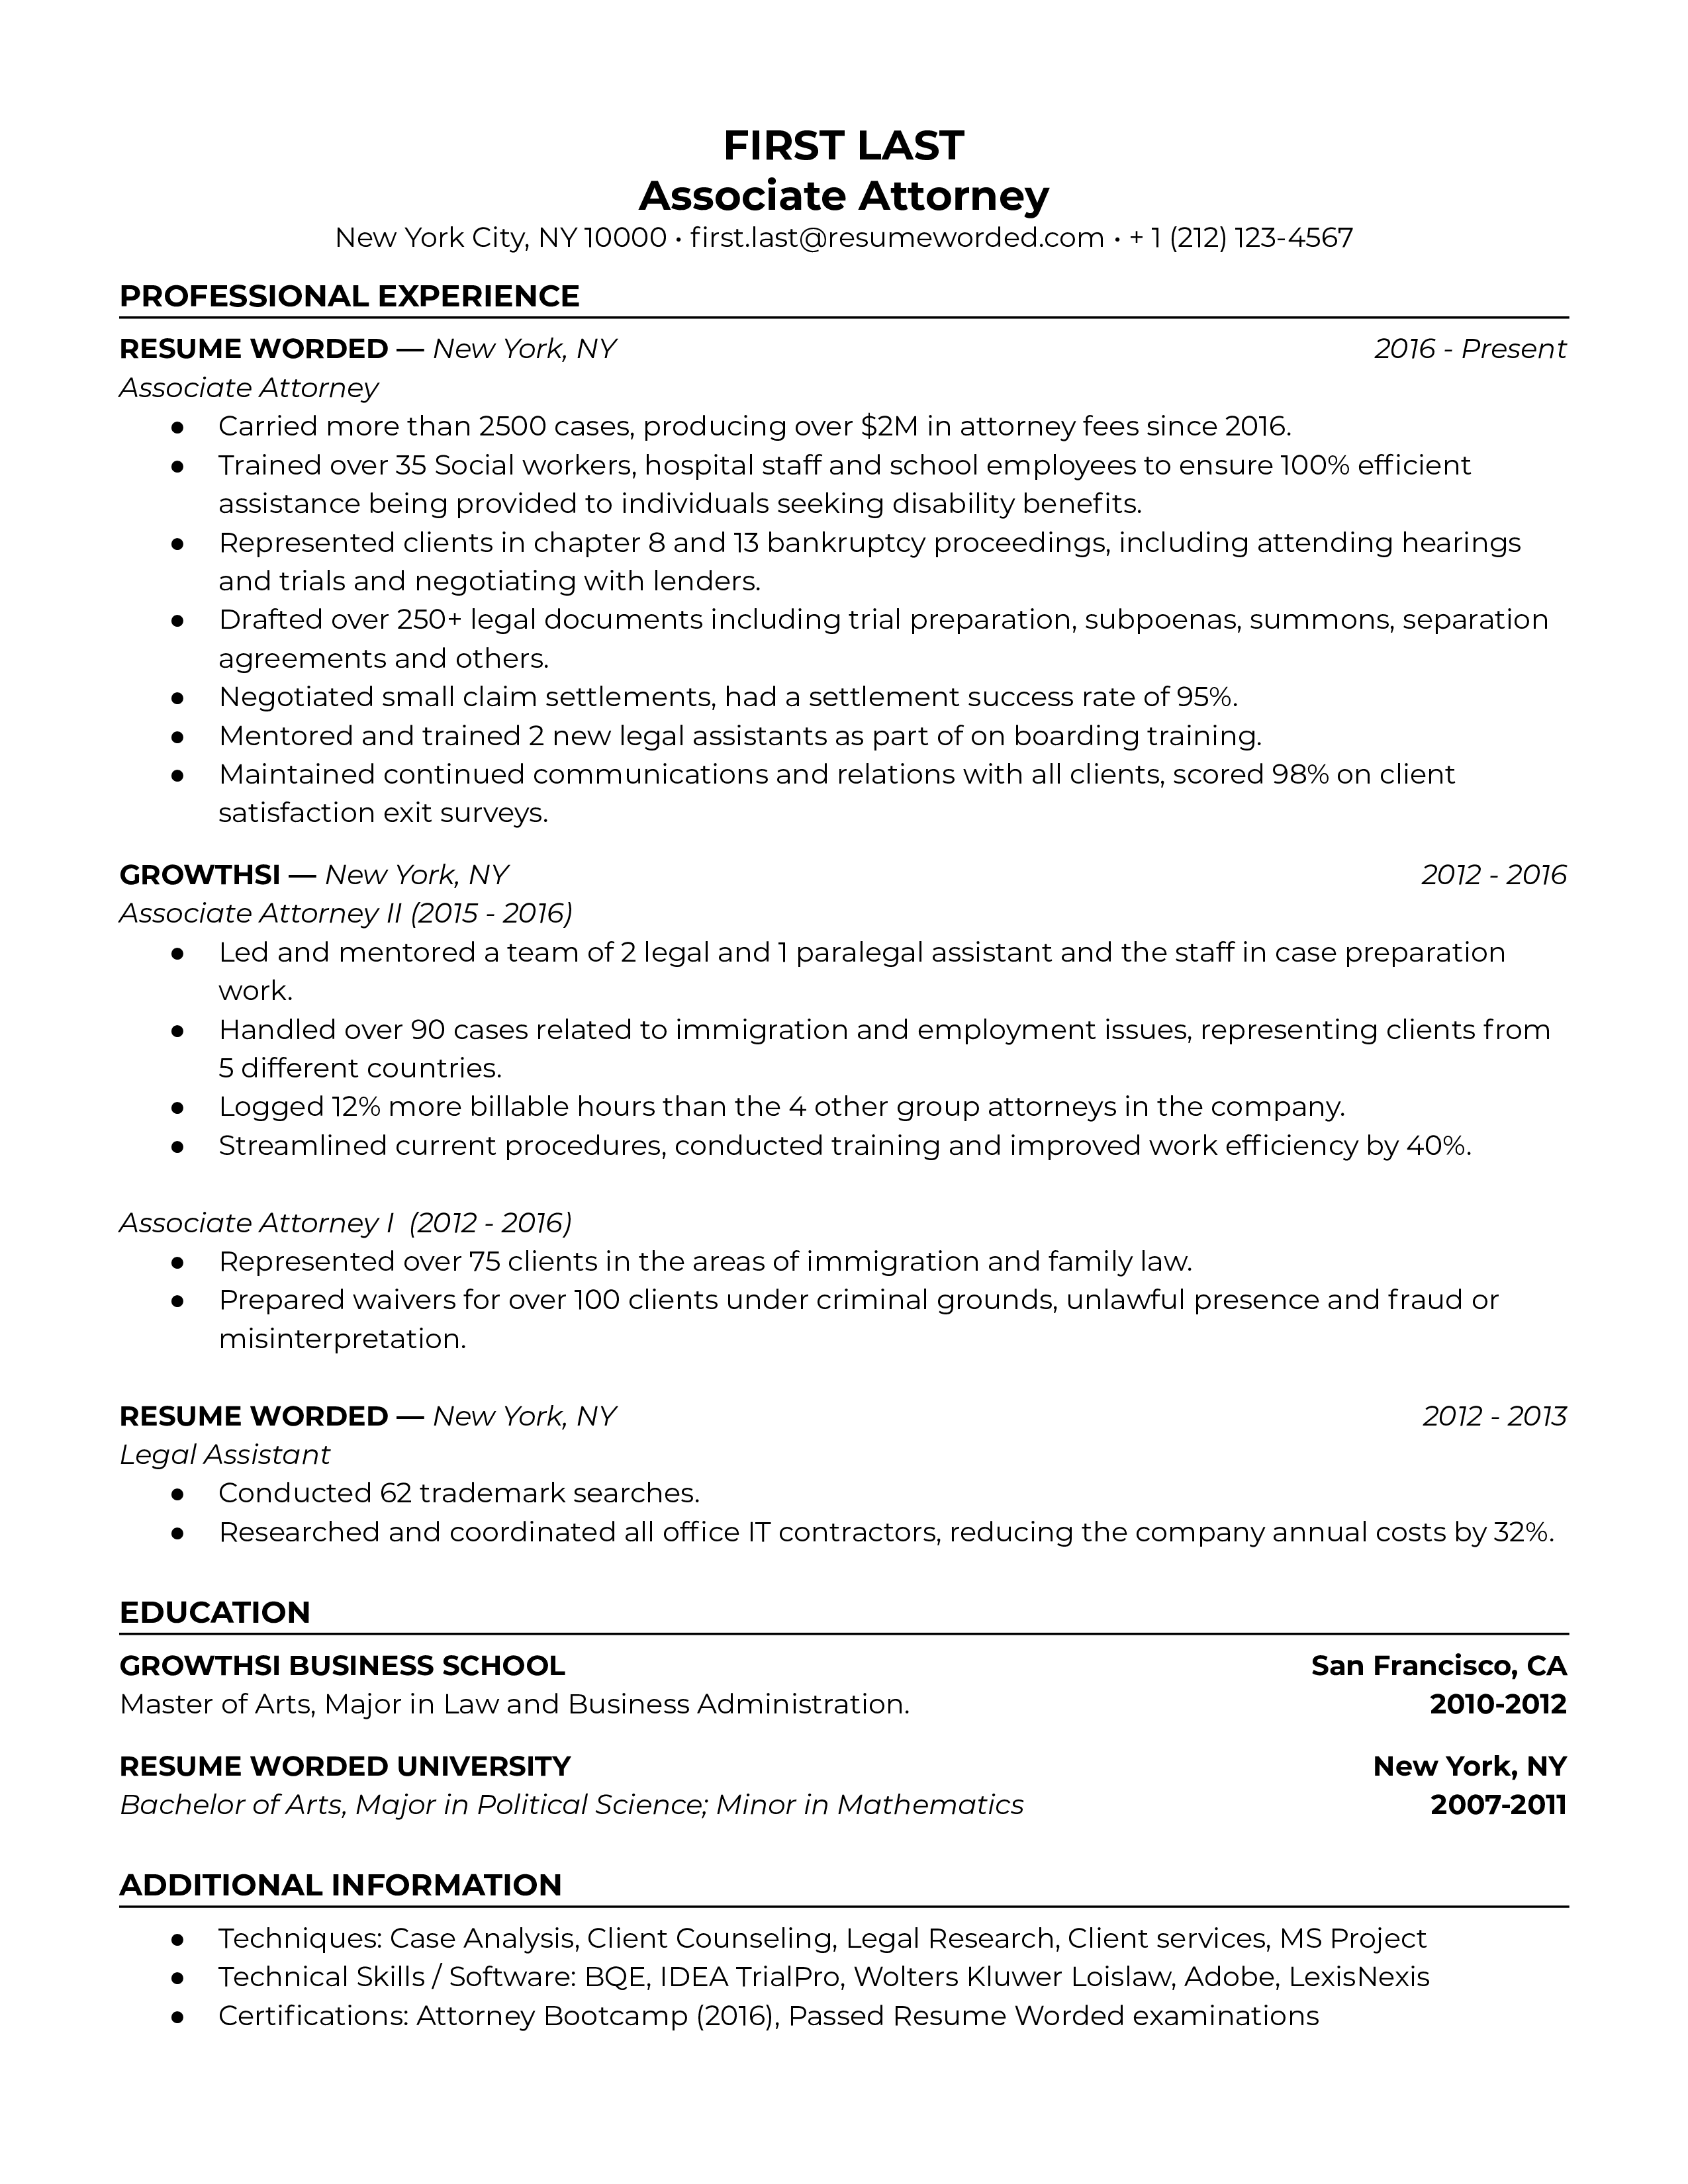 Associate Attorney resume showcasing research and communication skills